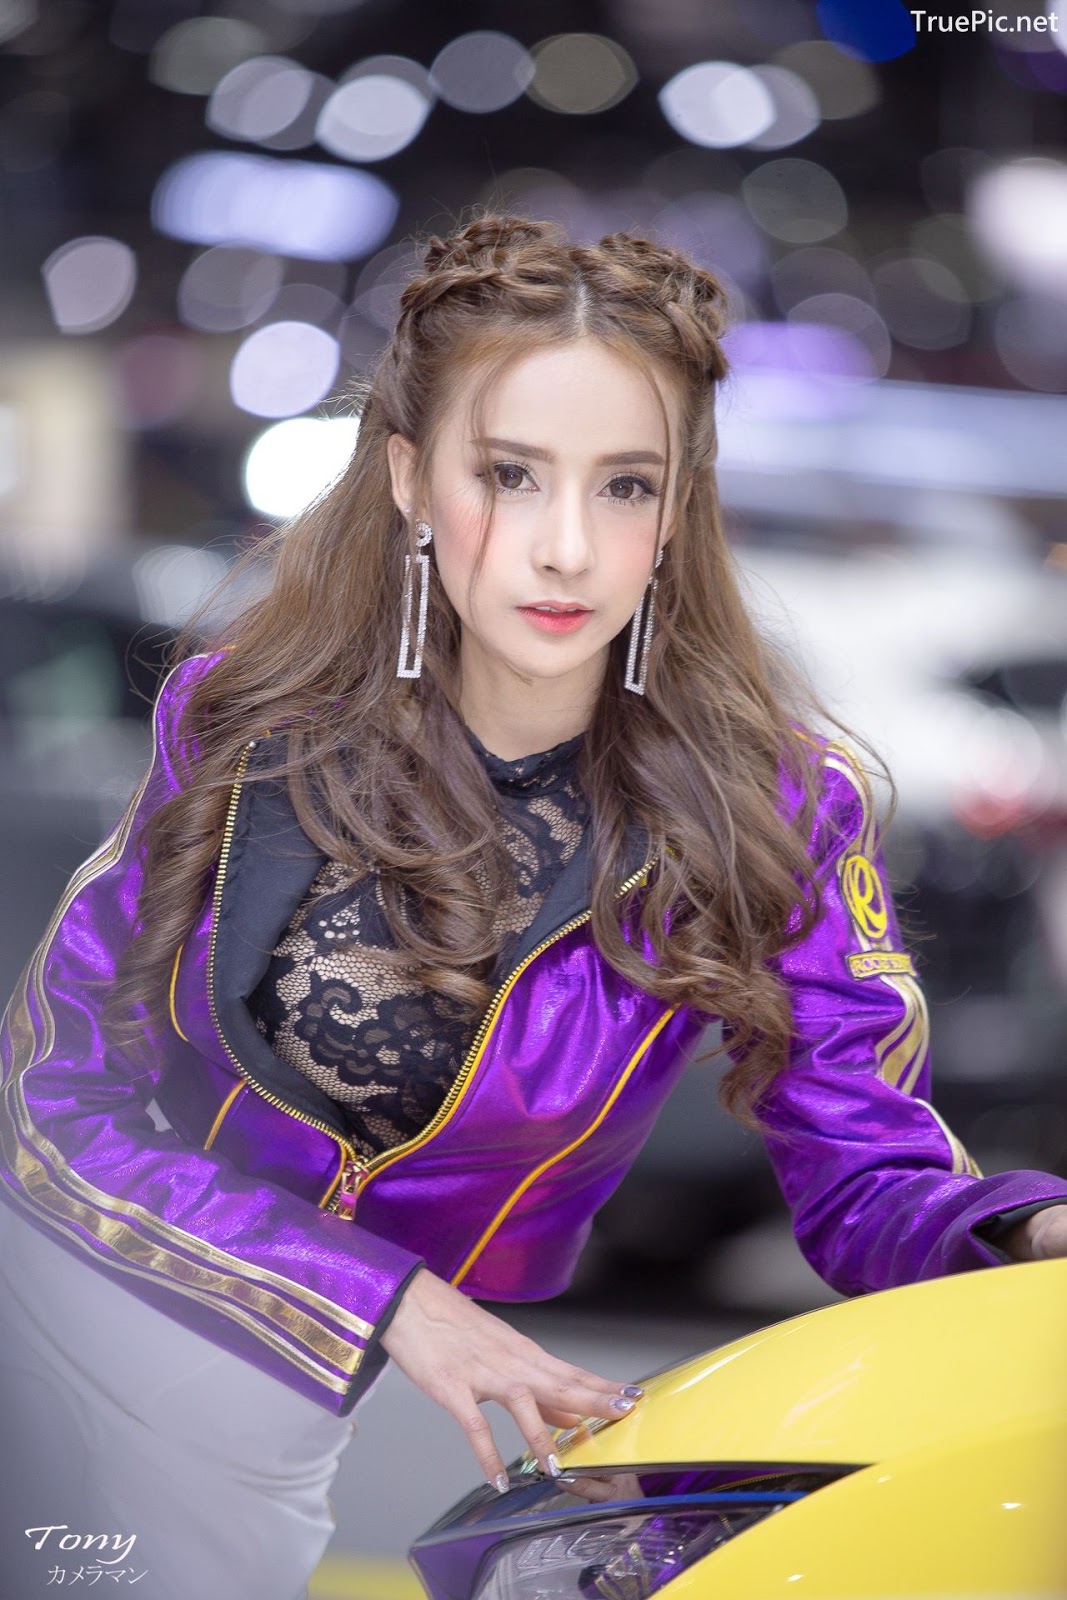 Image-Thailand-Hot-Model-Thai-Racing-Girl-At-Motor-Expo-2019-TruePic.net- Picture-88